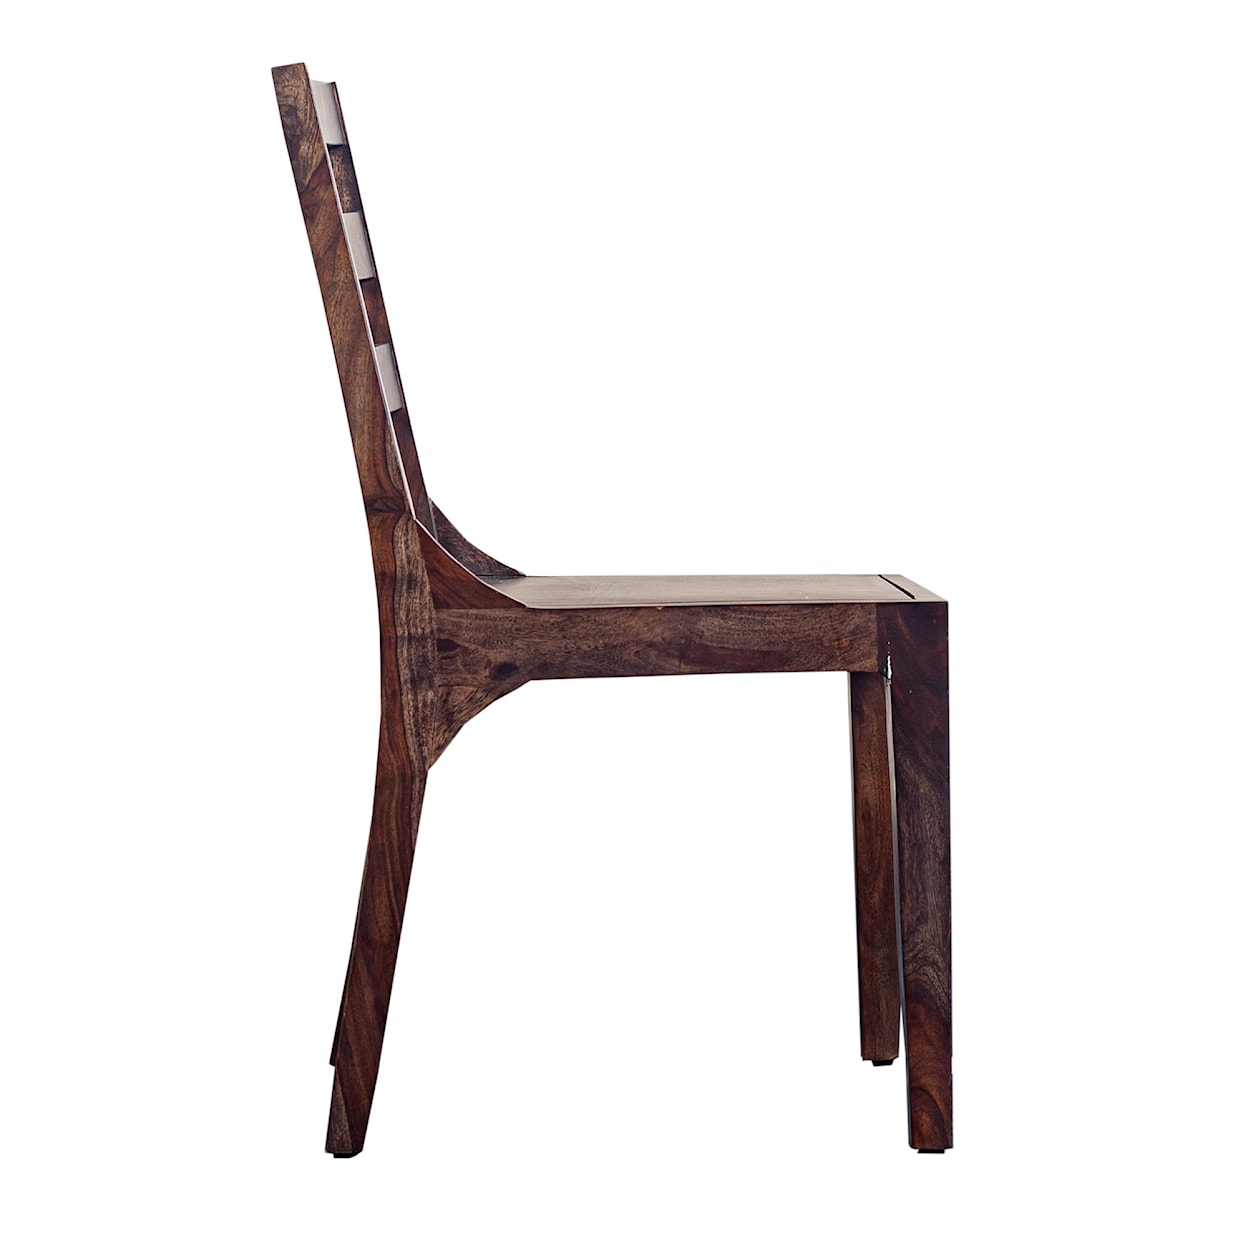 Porter Designs Fall River Side Chair